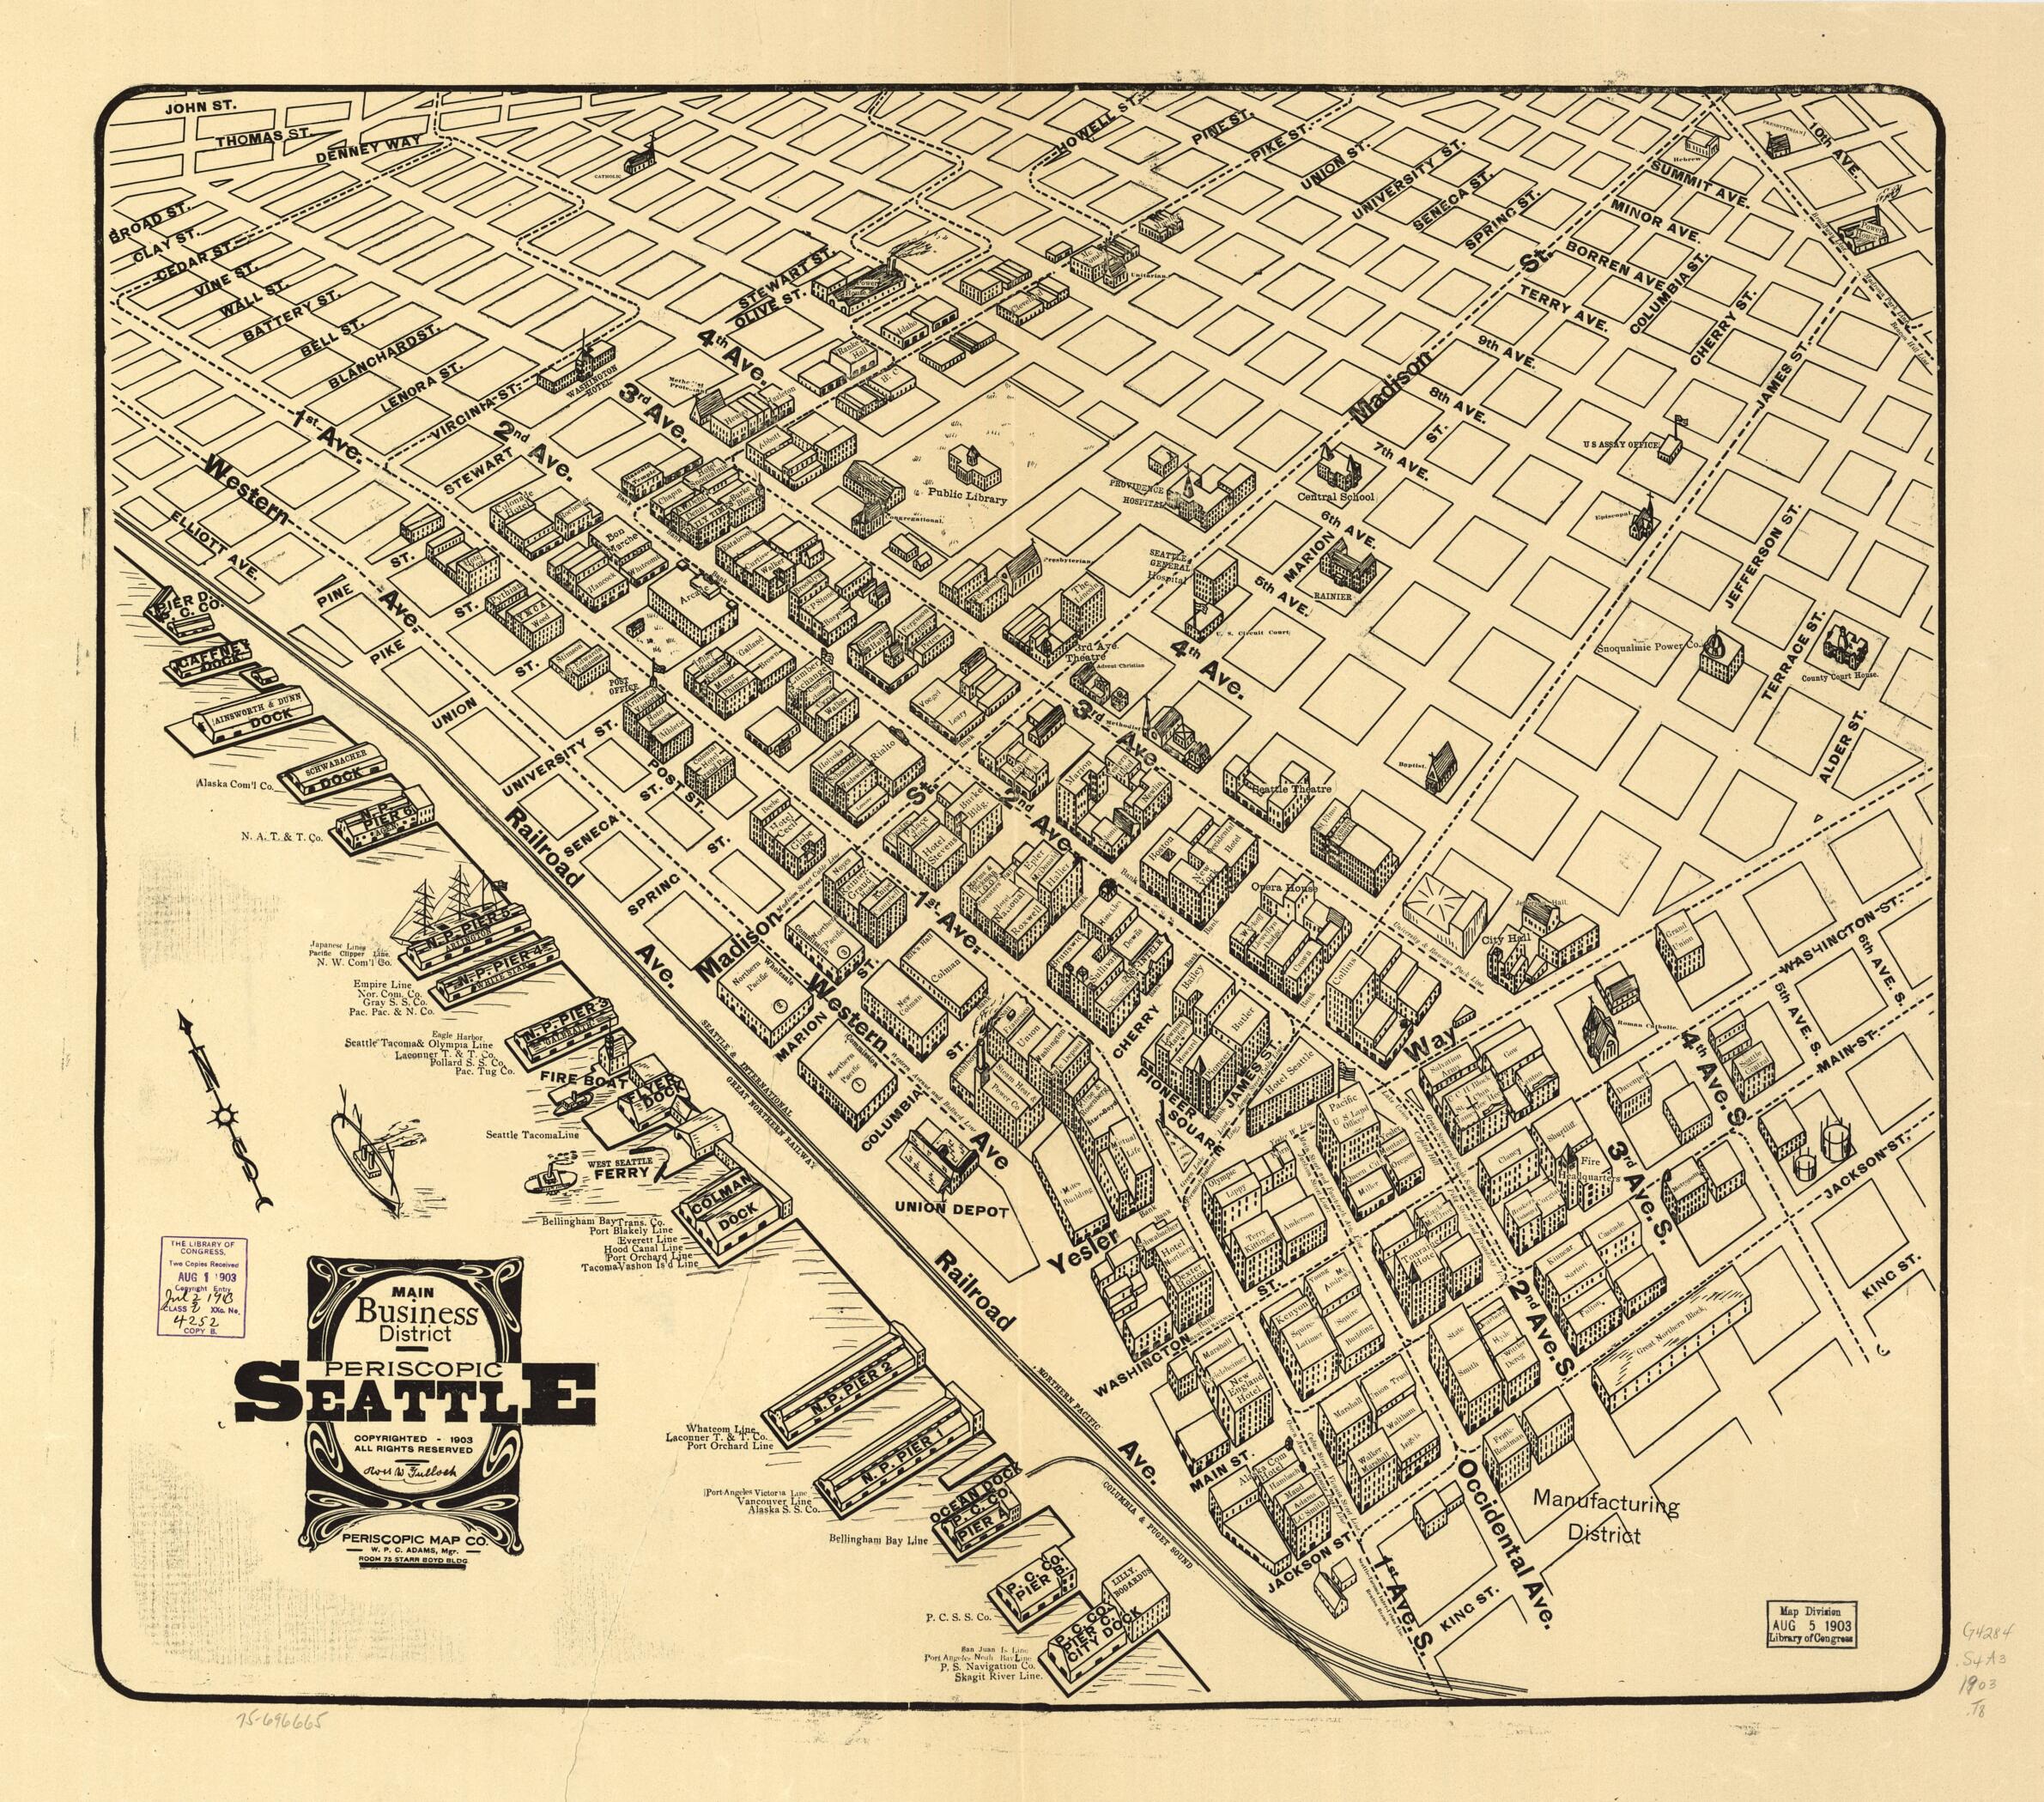 This old map of Main Business District Periscopic Seattle from 1903 was created by  Periscopic Map Co, Ross W. Tulloch in 1903